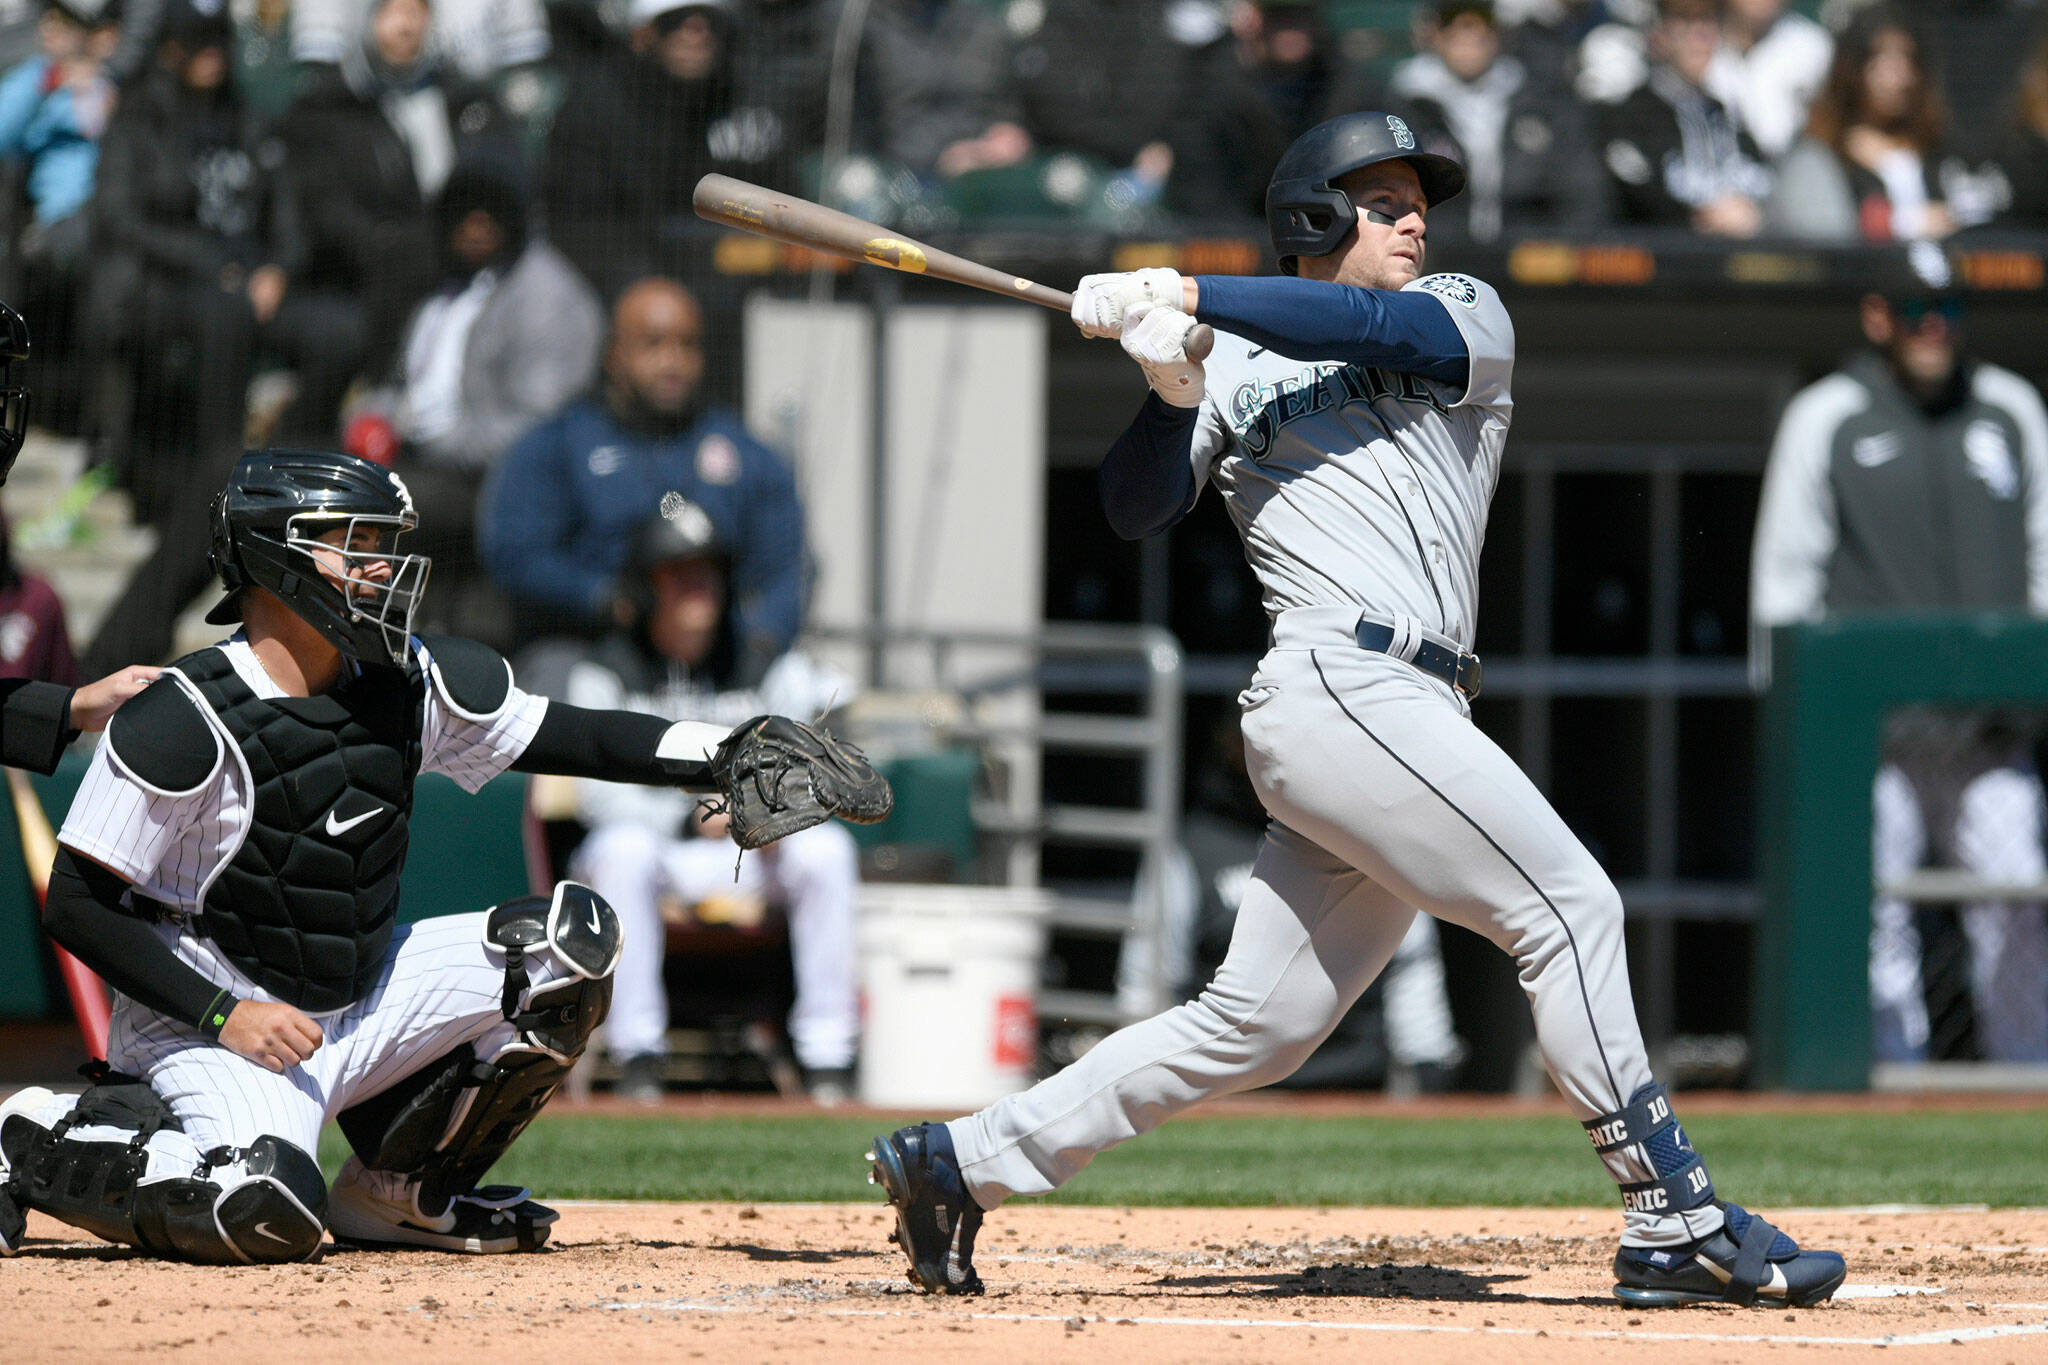 The Mariners’ Jarred Kelenic watches his two-run home run during the second inning of a game against the White Sox on Thursday in Chicago. (AP Photo/Paul Beaty)